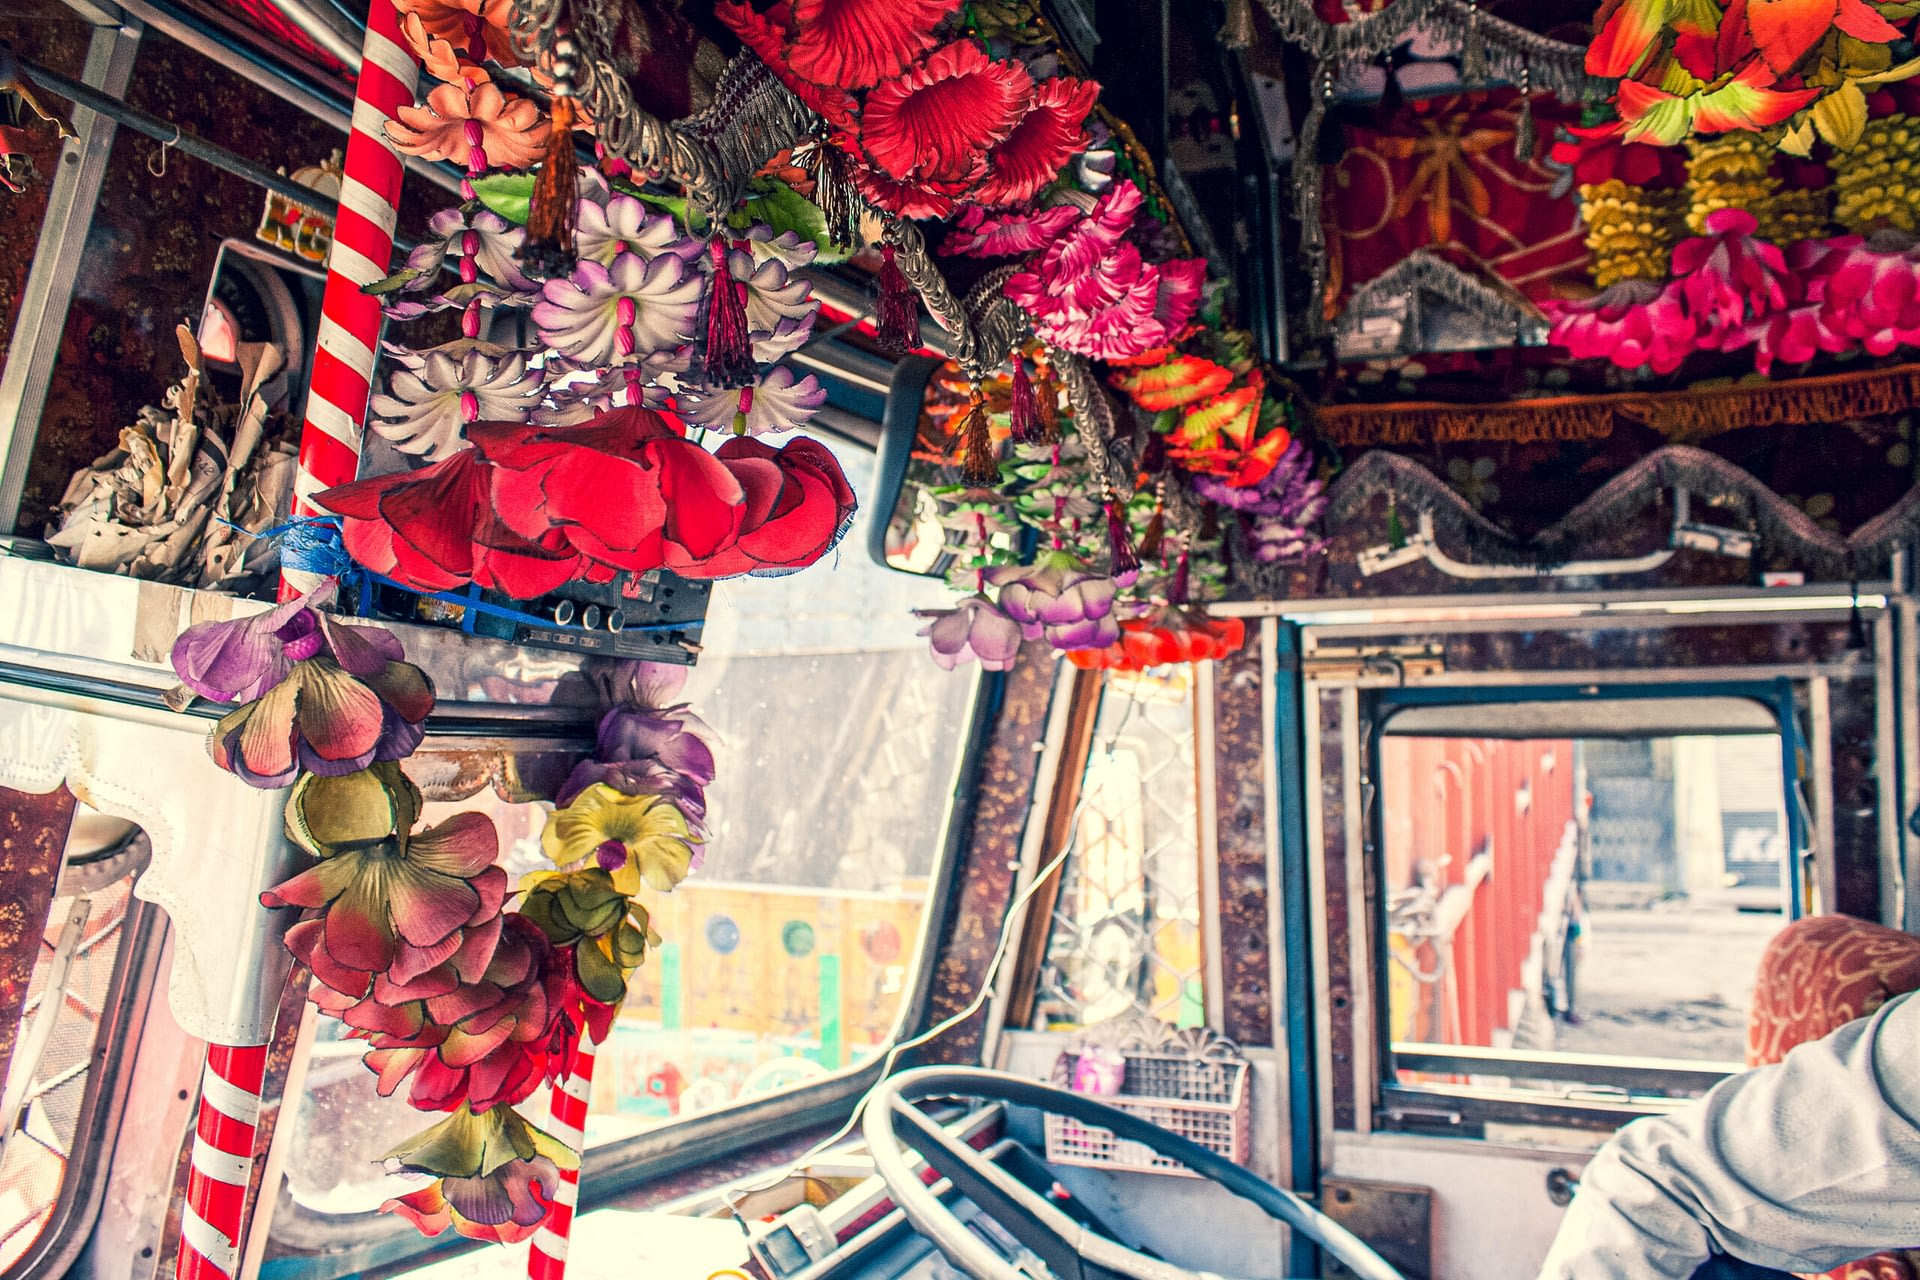 Image: The inside of a truck cab decorated with flowers